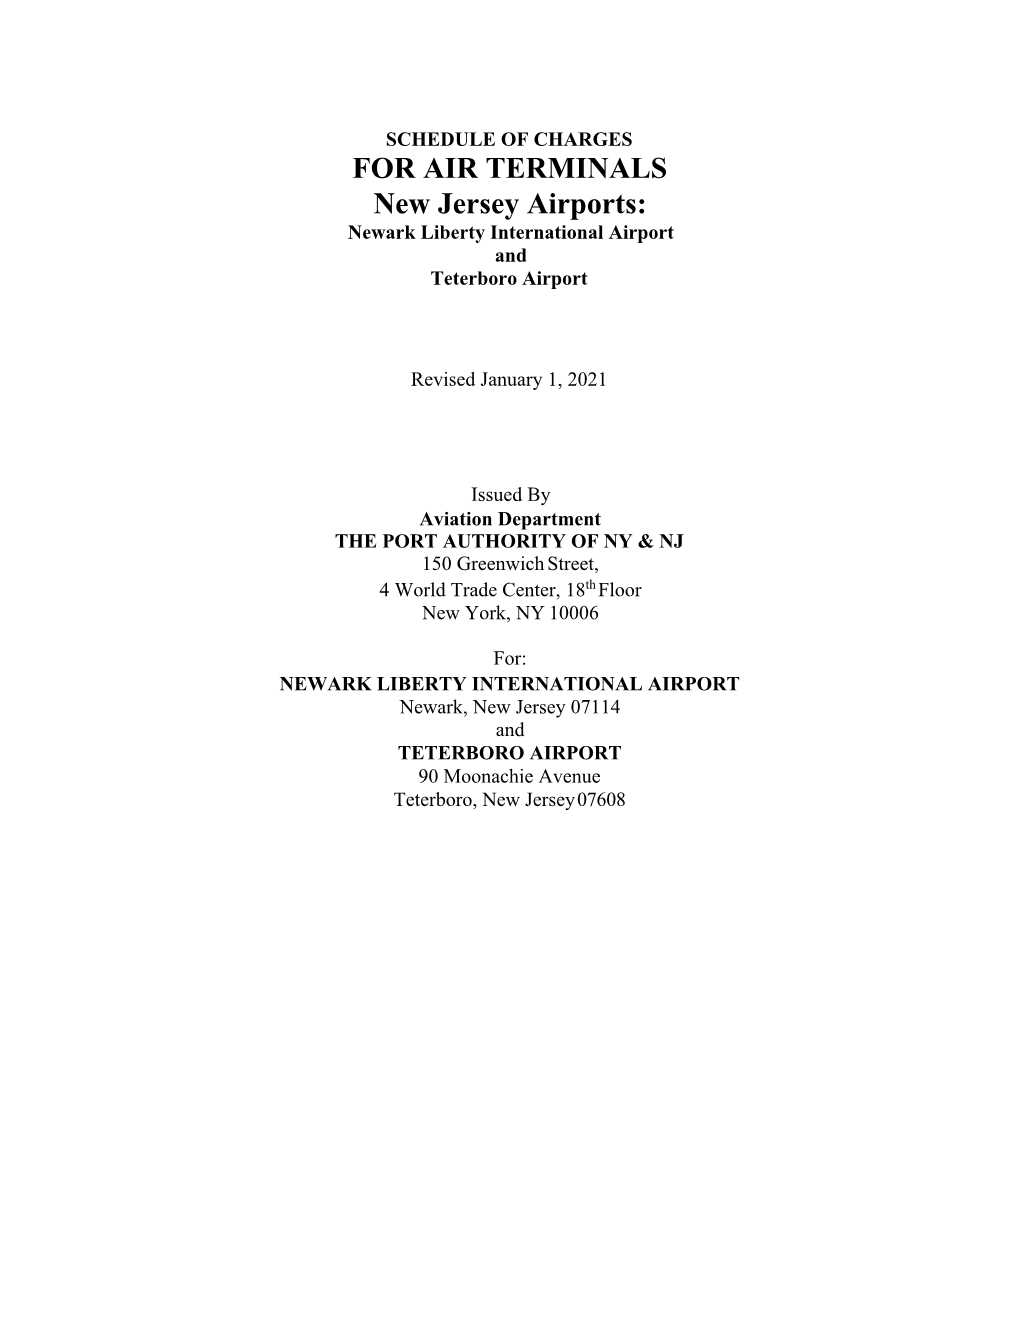 FOR AIR TERMINALS New Jersey Airports: Newark Liberty International Airport and Teterboro Airport